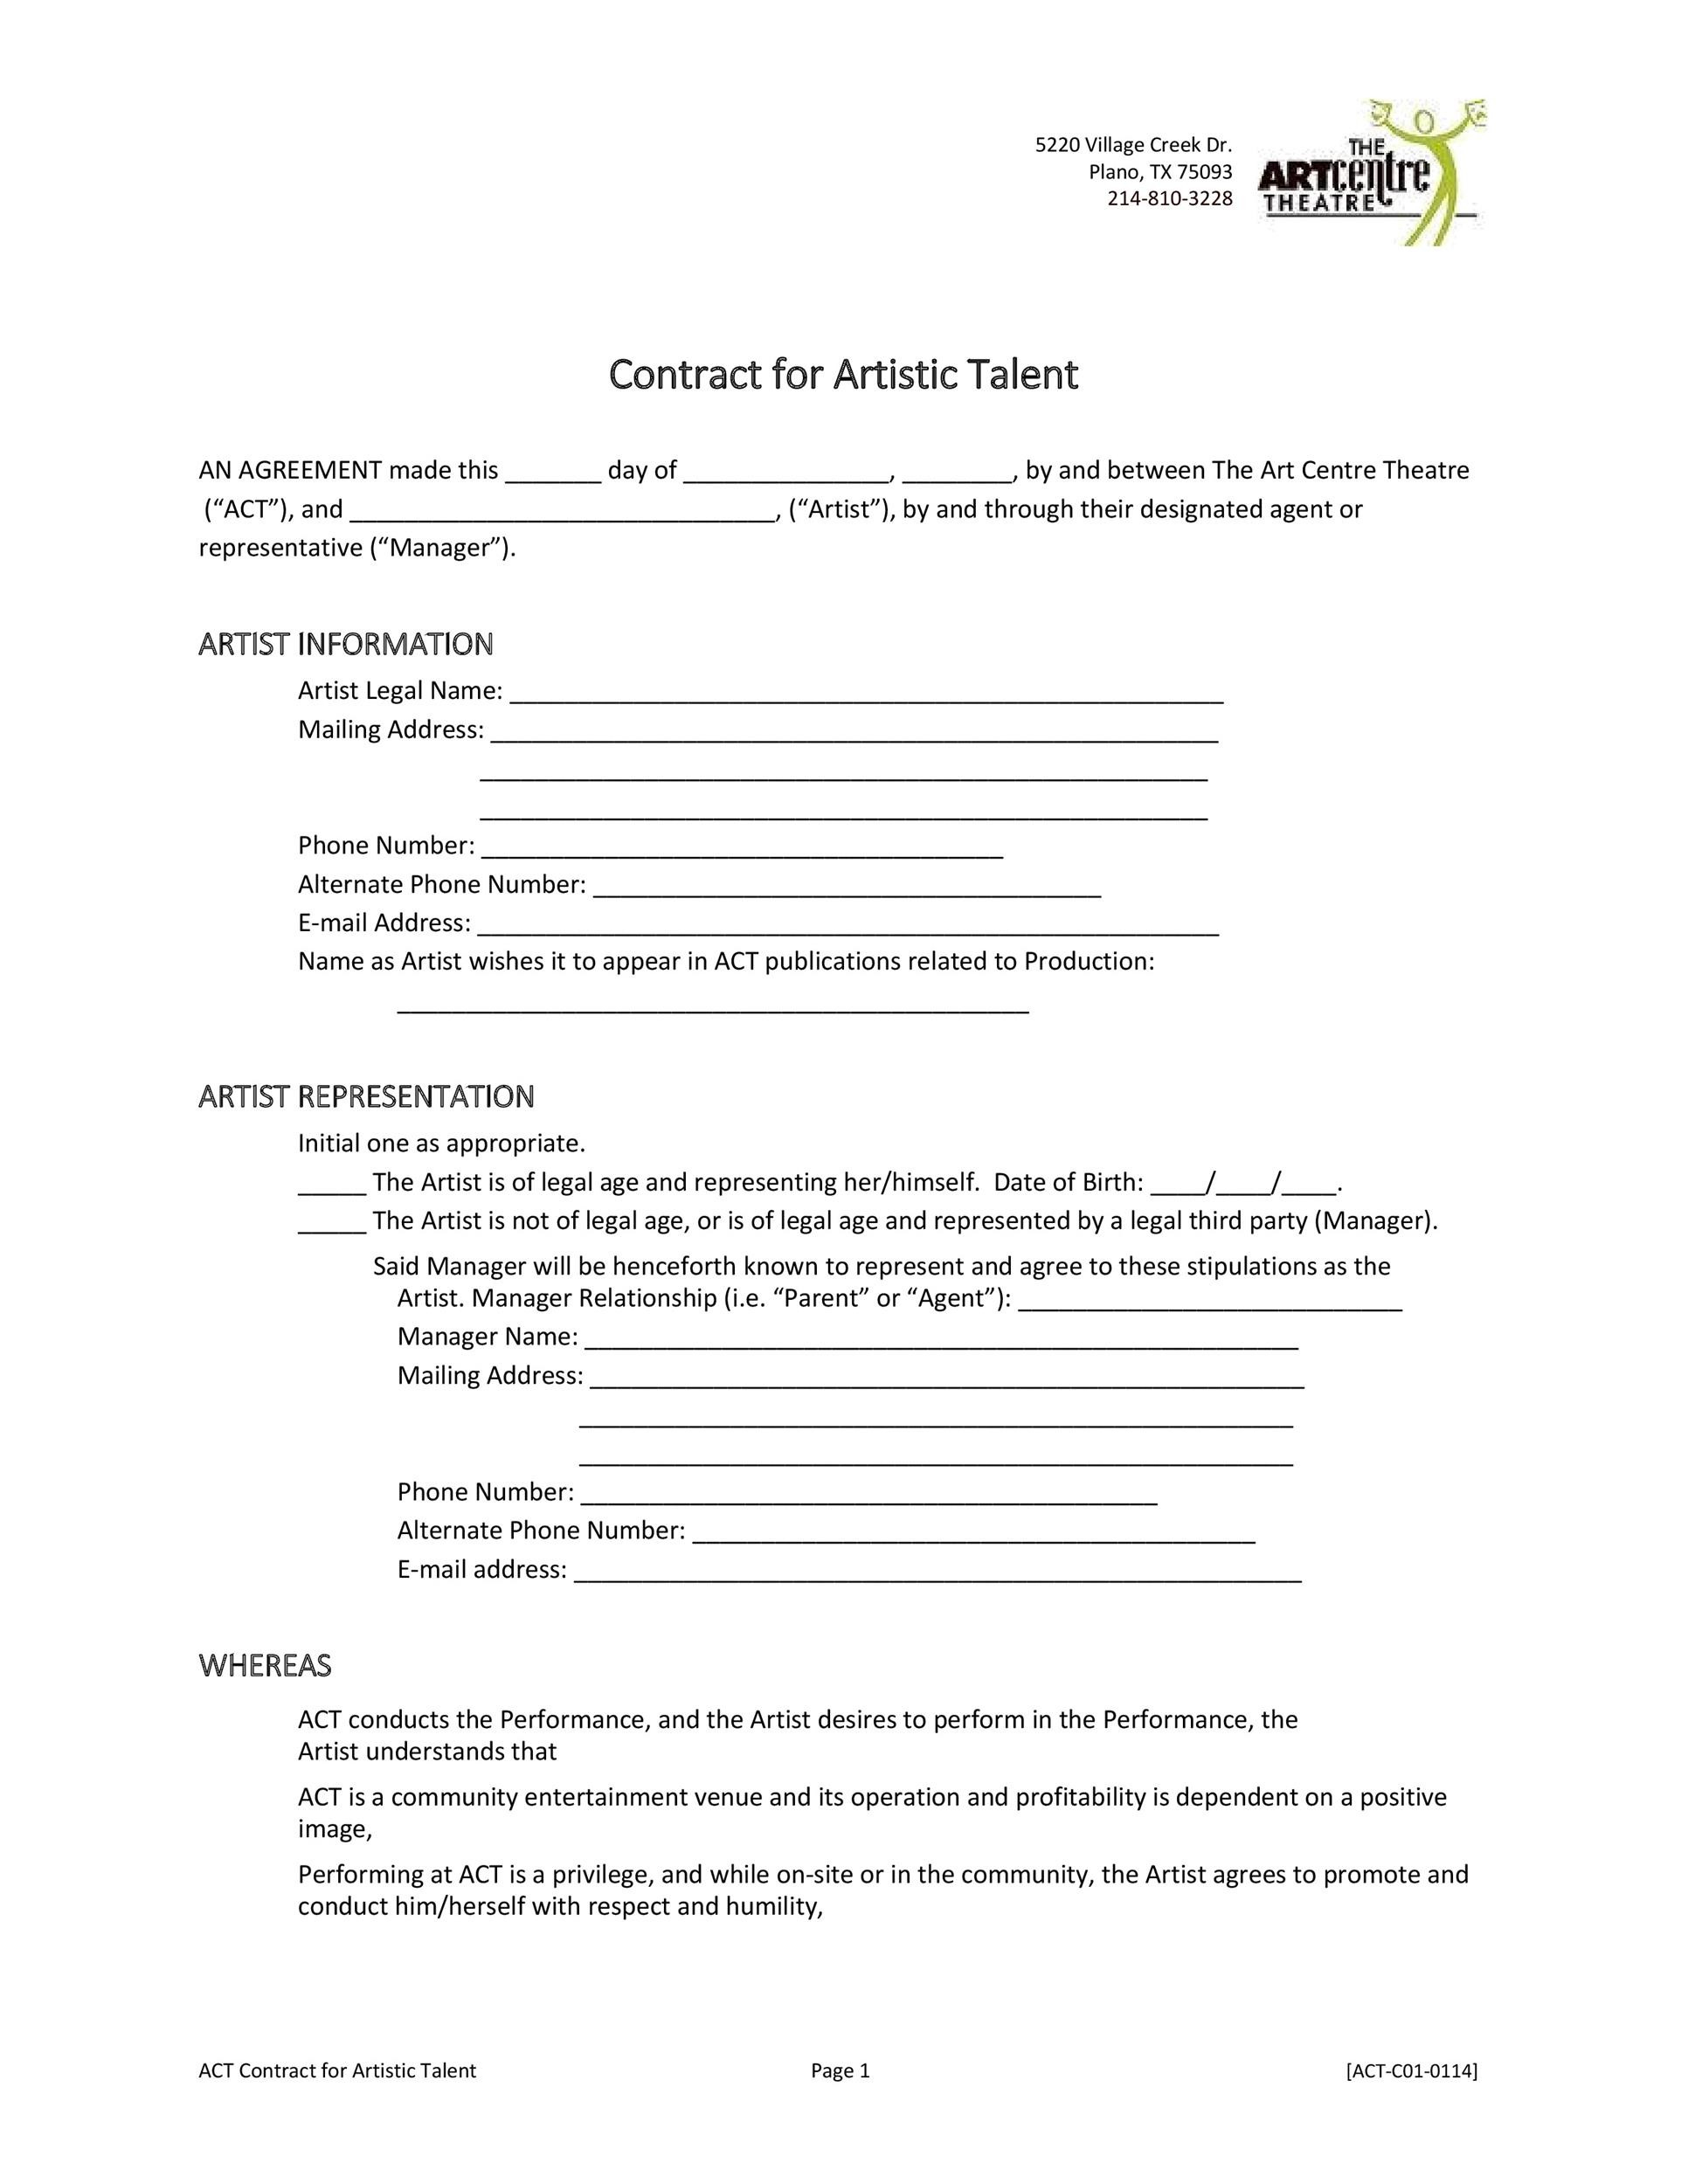 50 Artist Management Contract Templates (Ms Word) ᐅ Templatelab with Simple Commission Only Contract Template